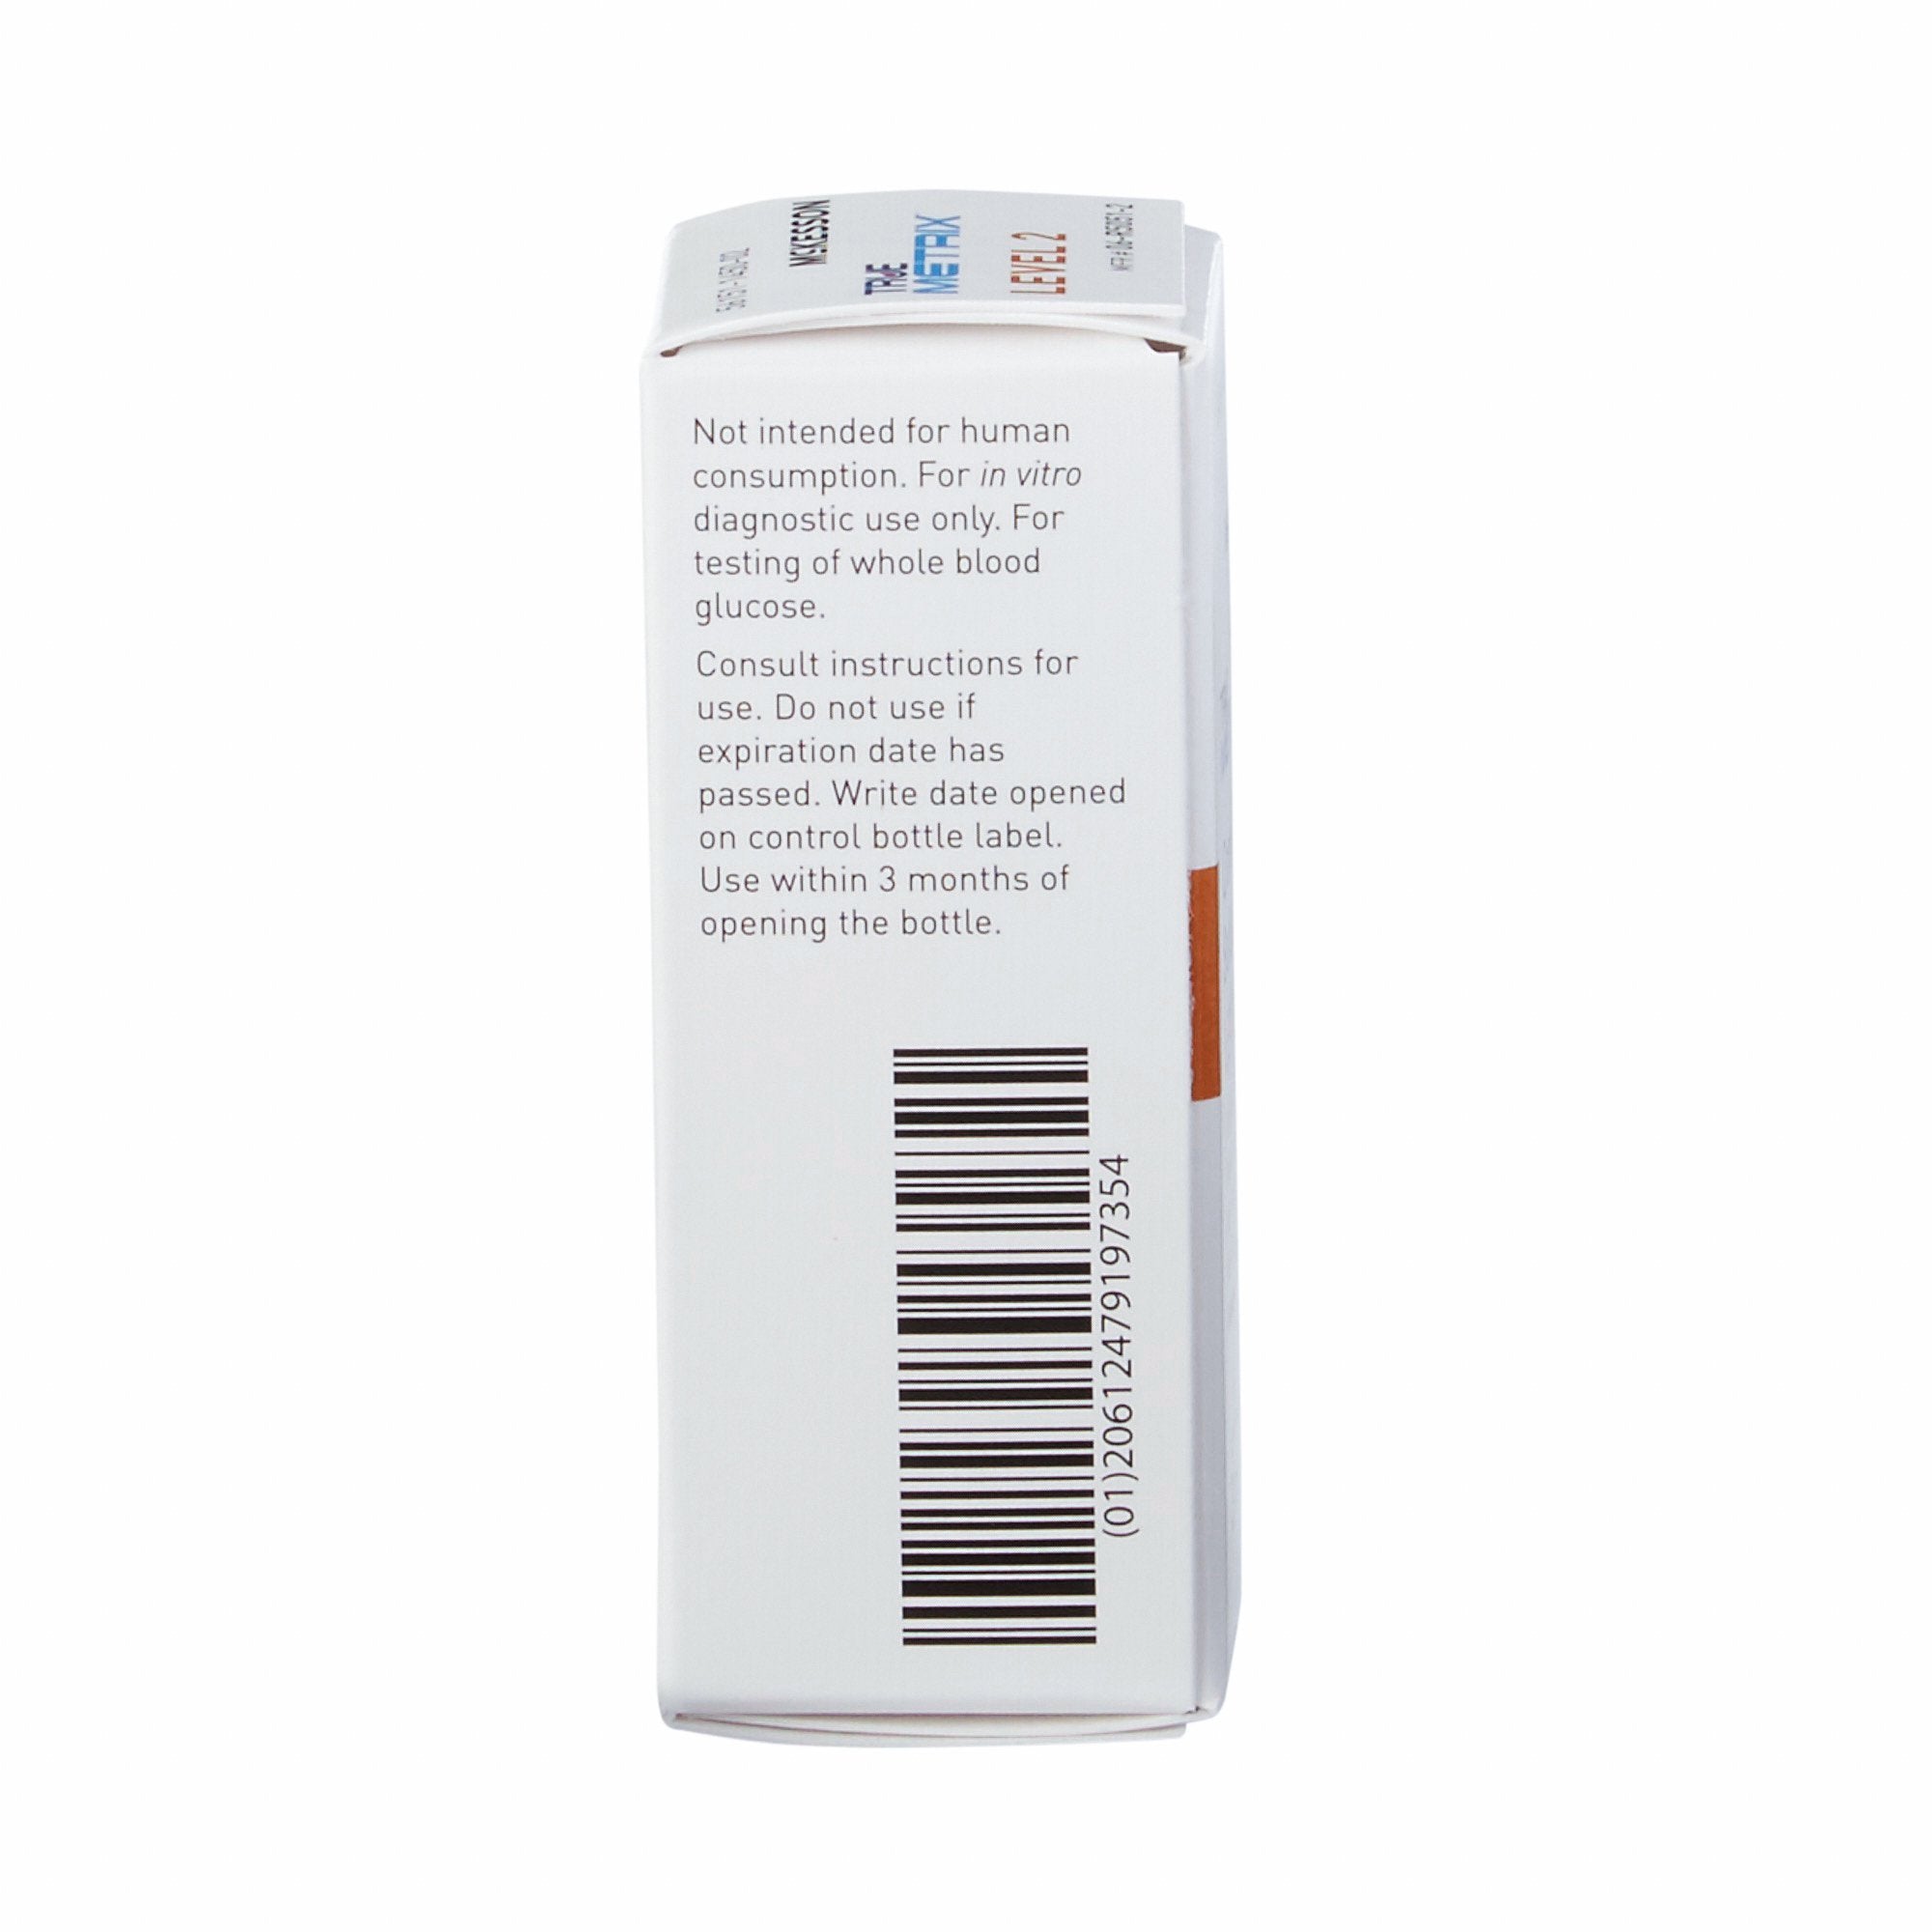 Diagnostic>Diabetes Supply>Glucose Meter Controls - McKesson - Wasatch Medical Supply